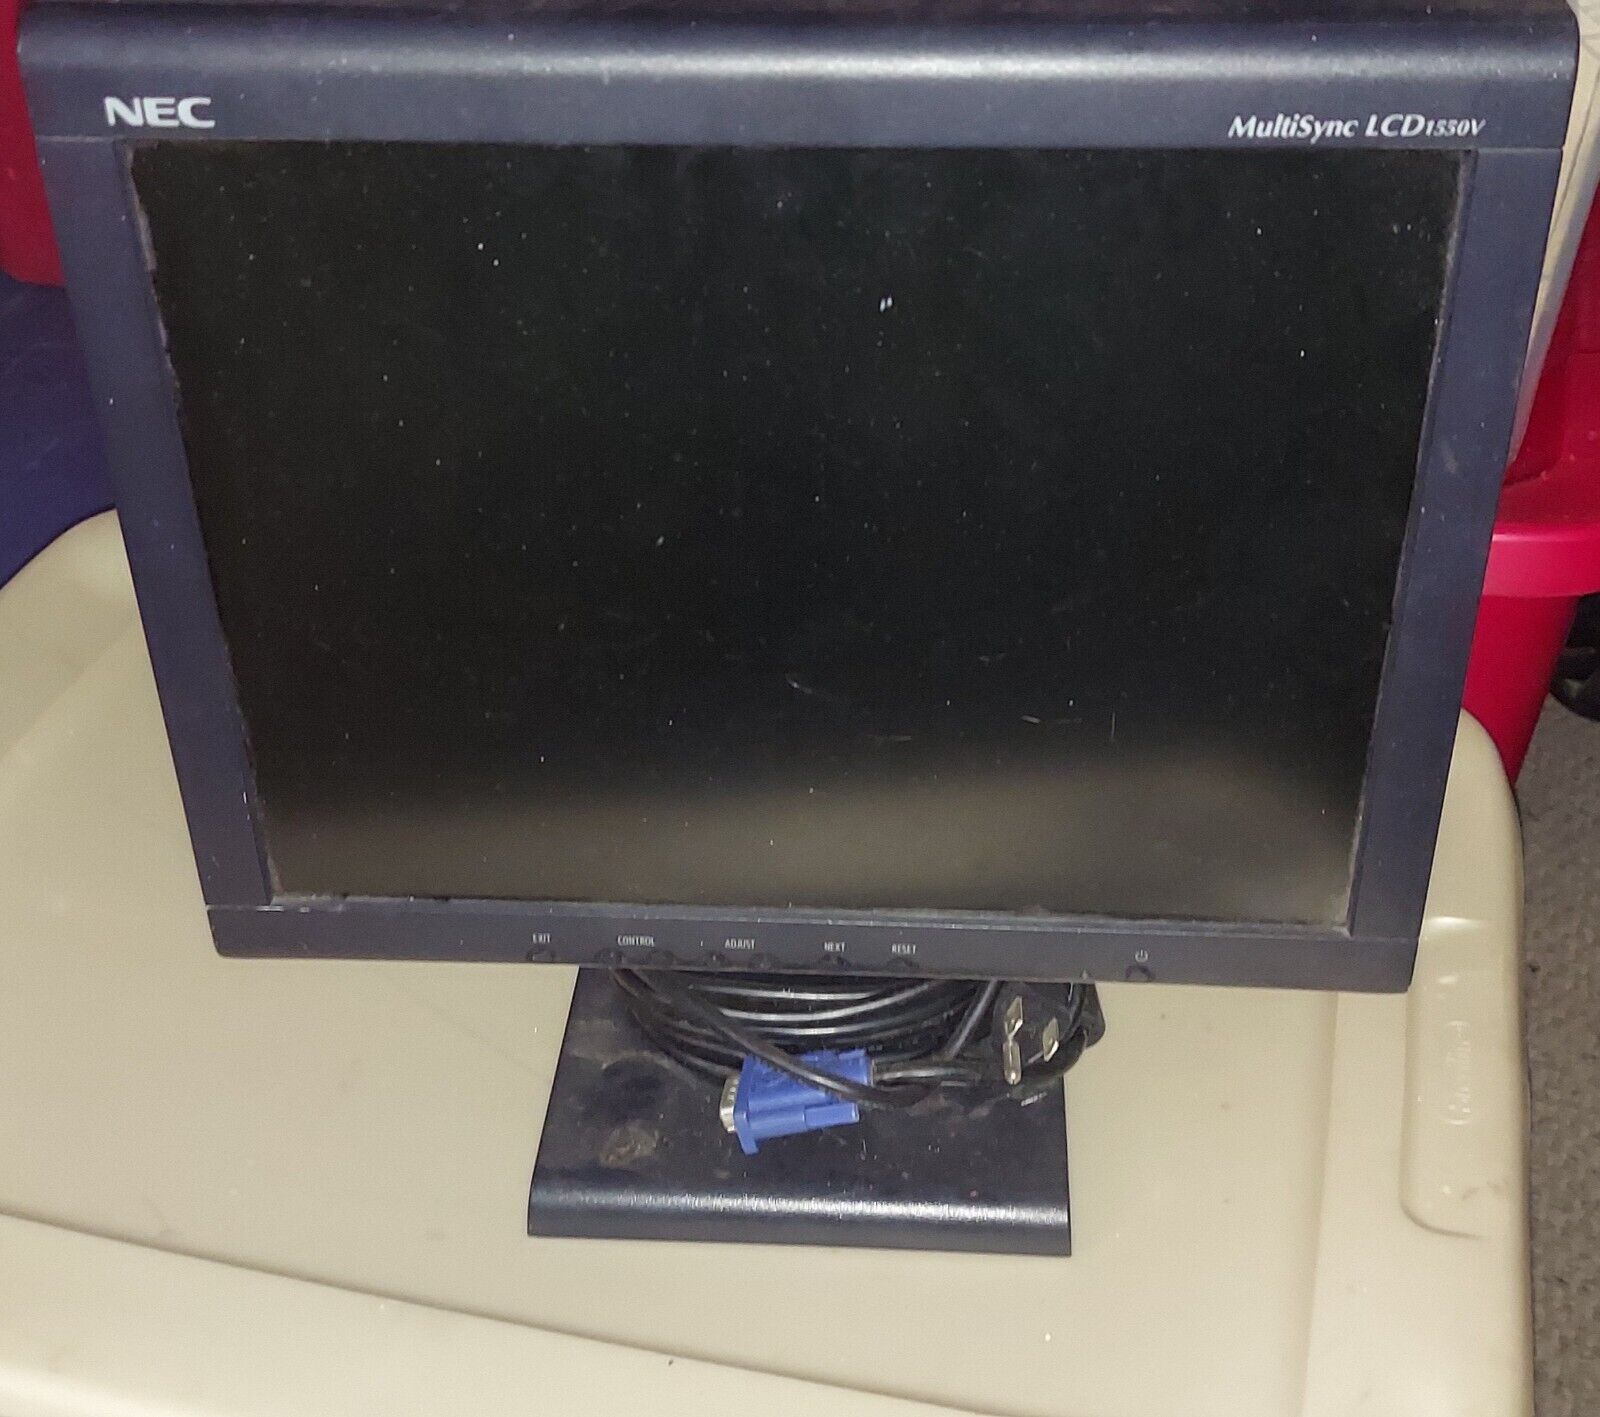 NEC LCD1550V LCD Monitor Tested Works Vintage